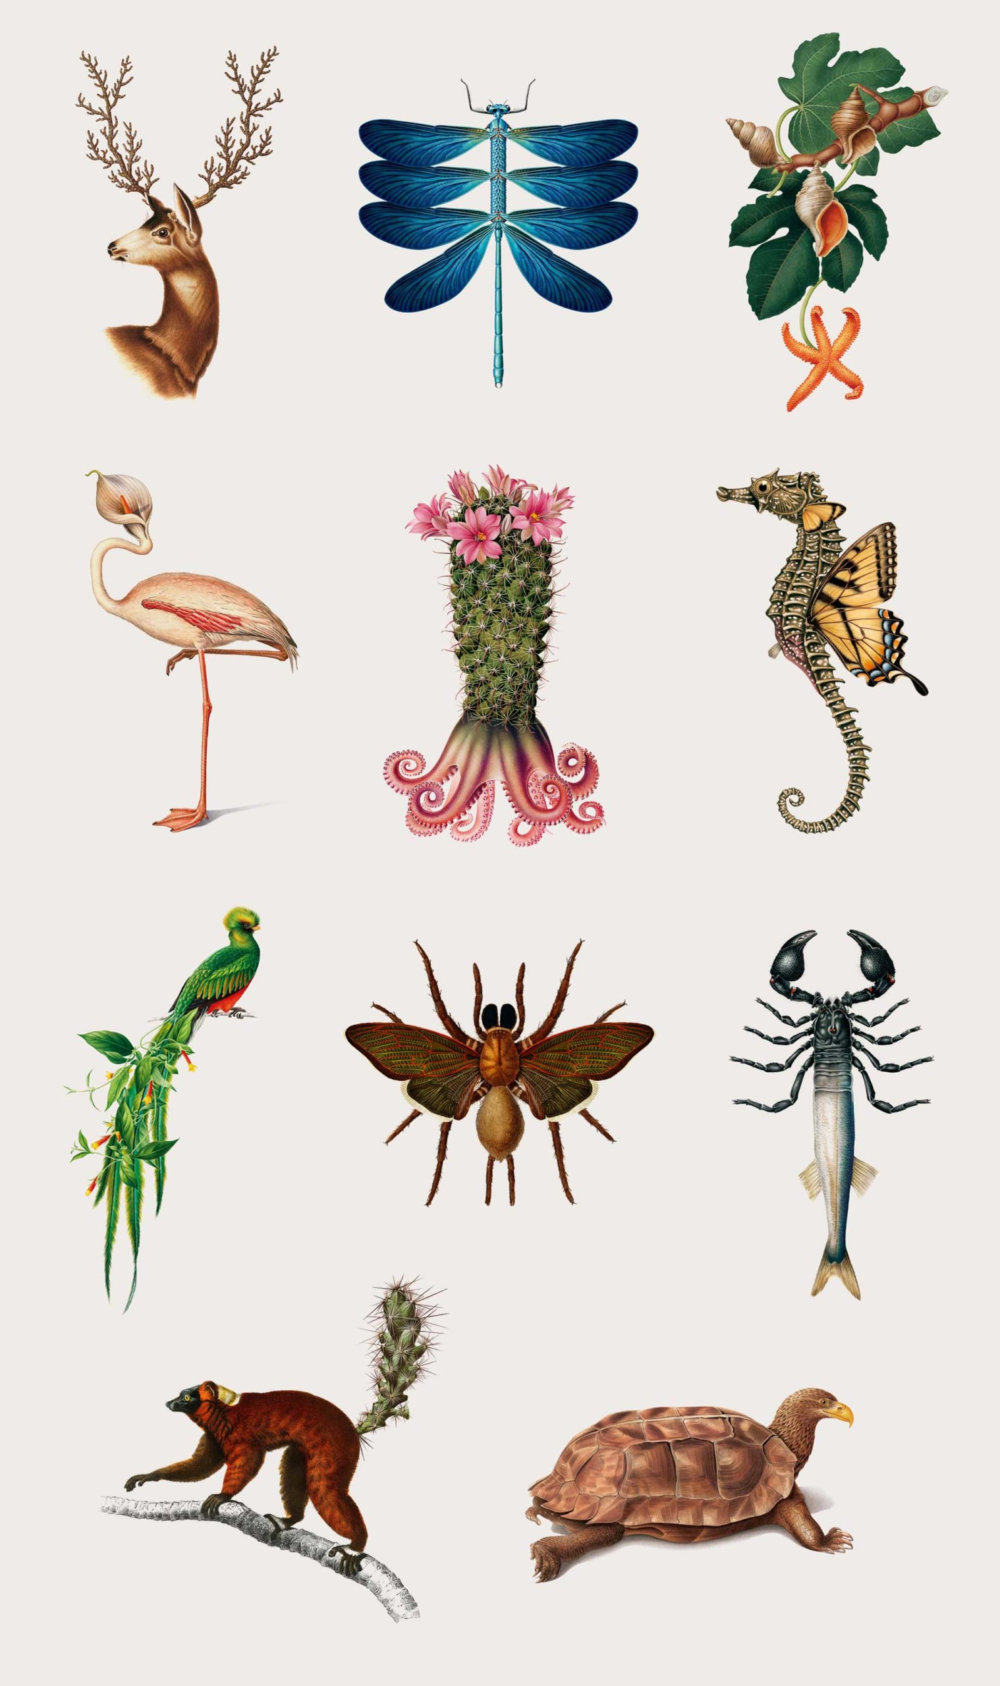 The Creative Specimens Hybrid Creatures Of Animals Insects And Plants In Lush Vintage Style Illustrations By Mark Brooks 8